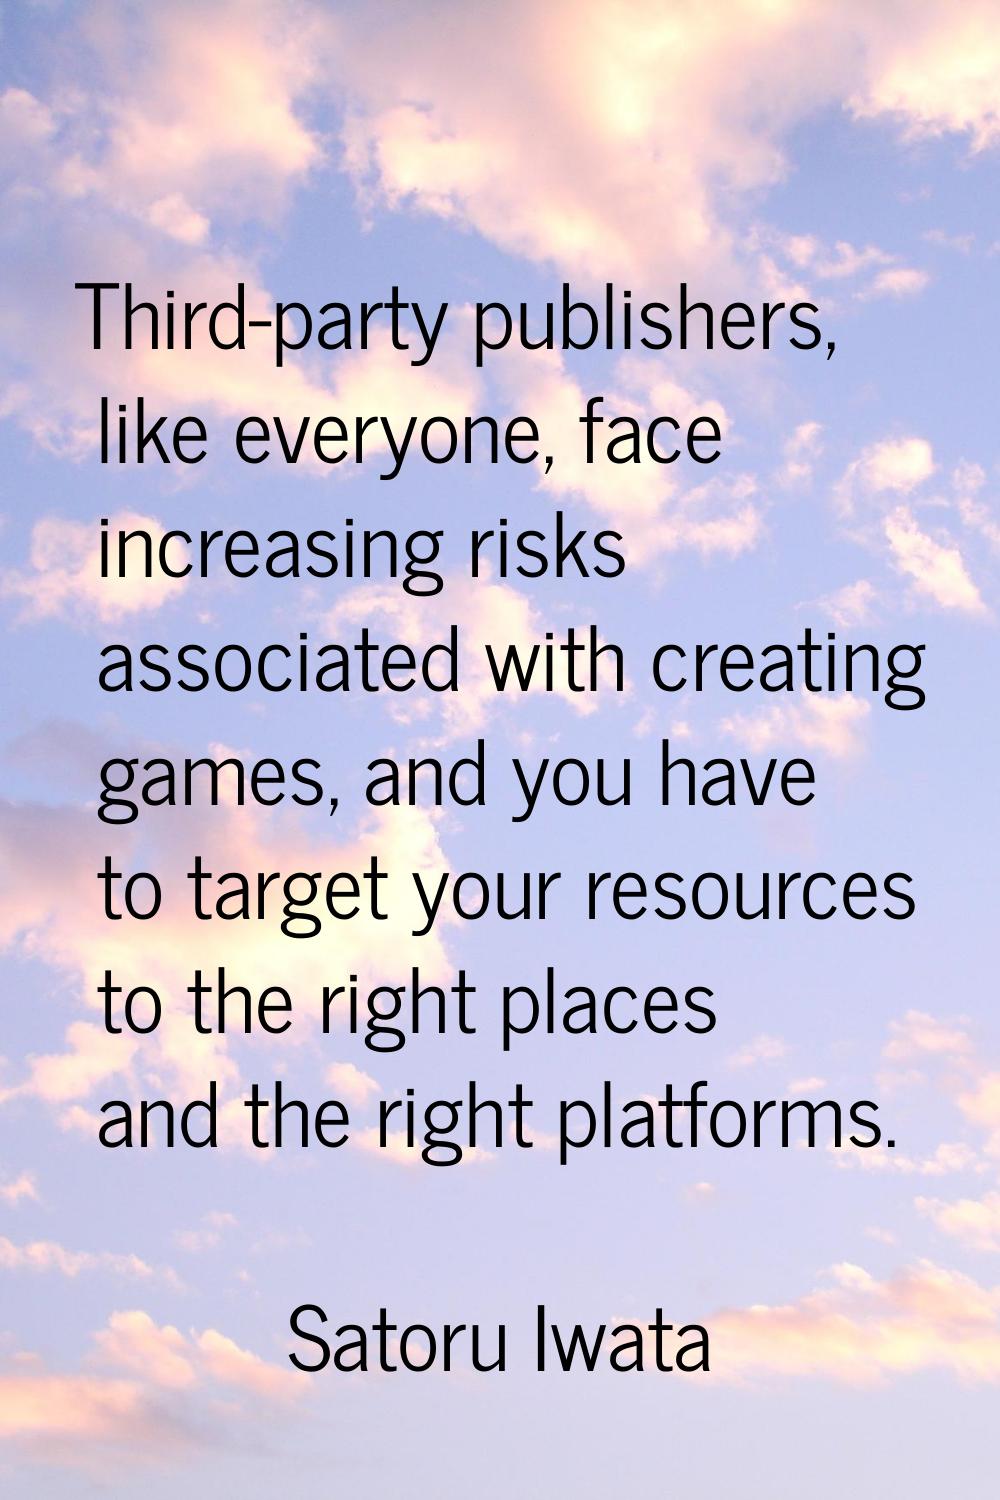 Third-party publishers, like everyone, face increasing risks associated with creating games, and yo